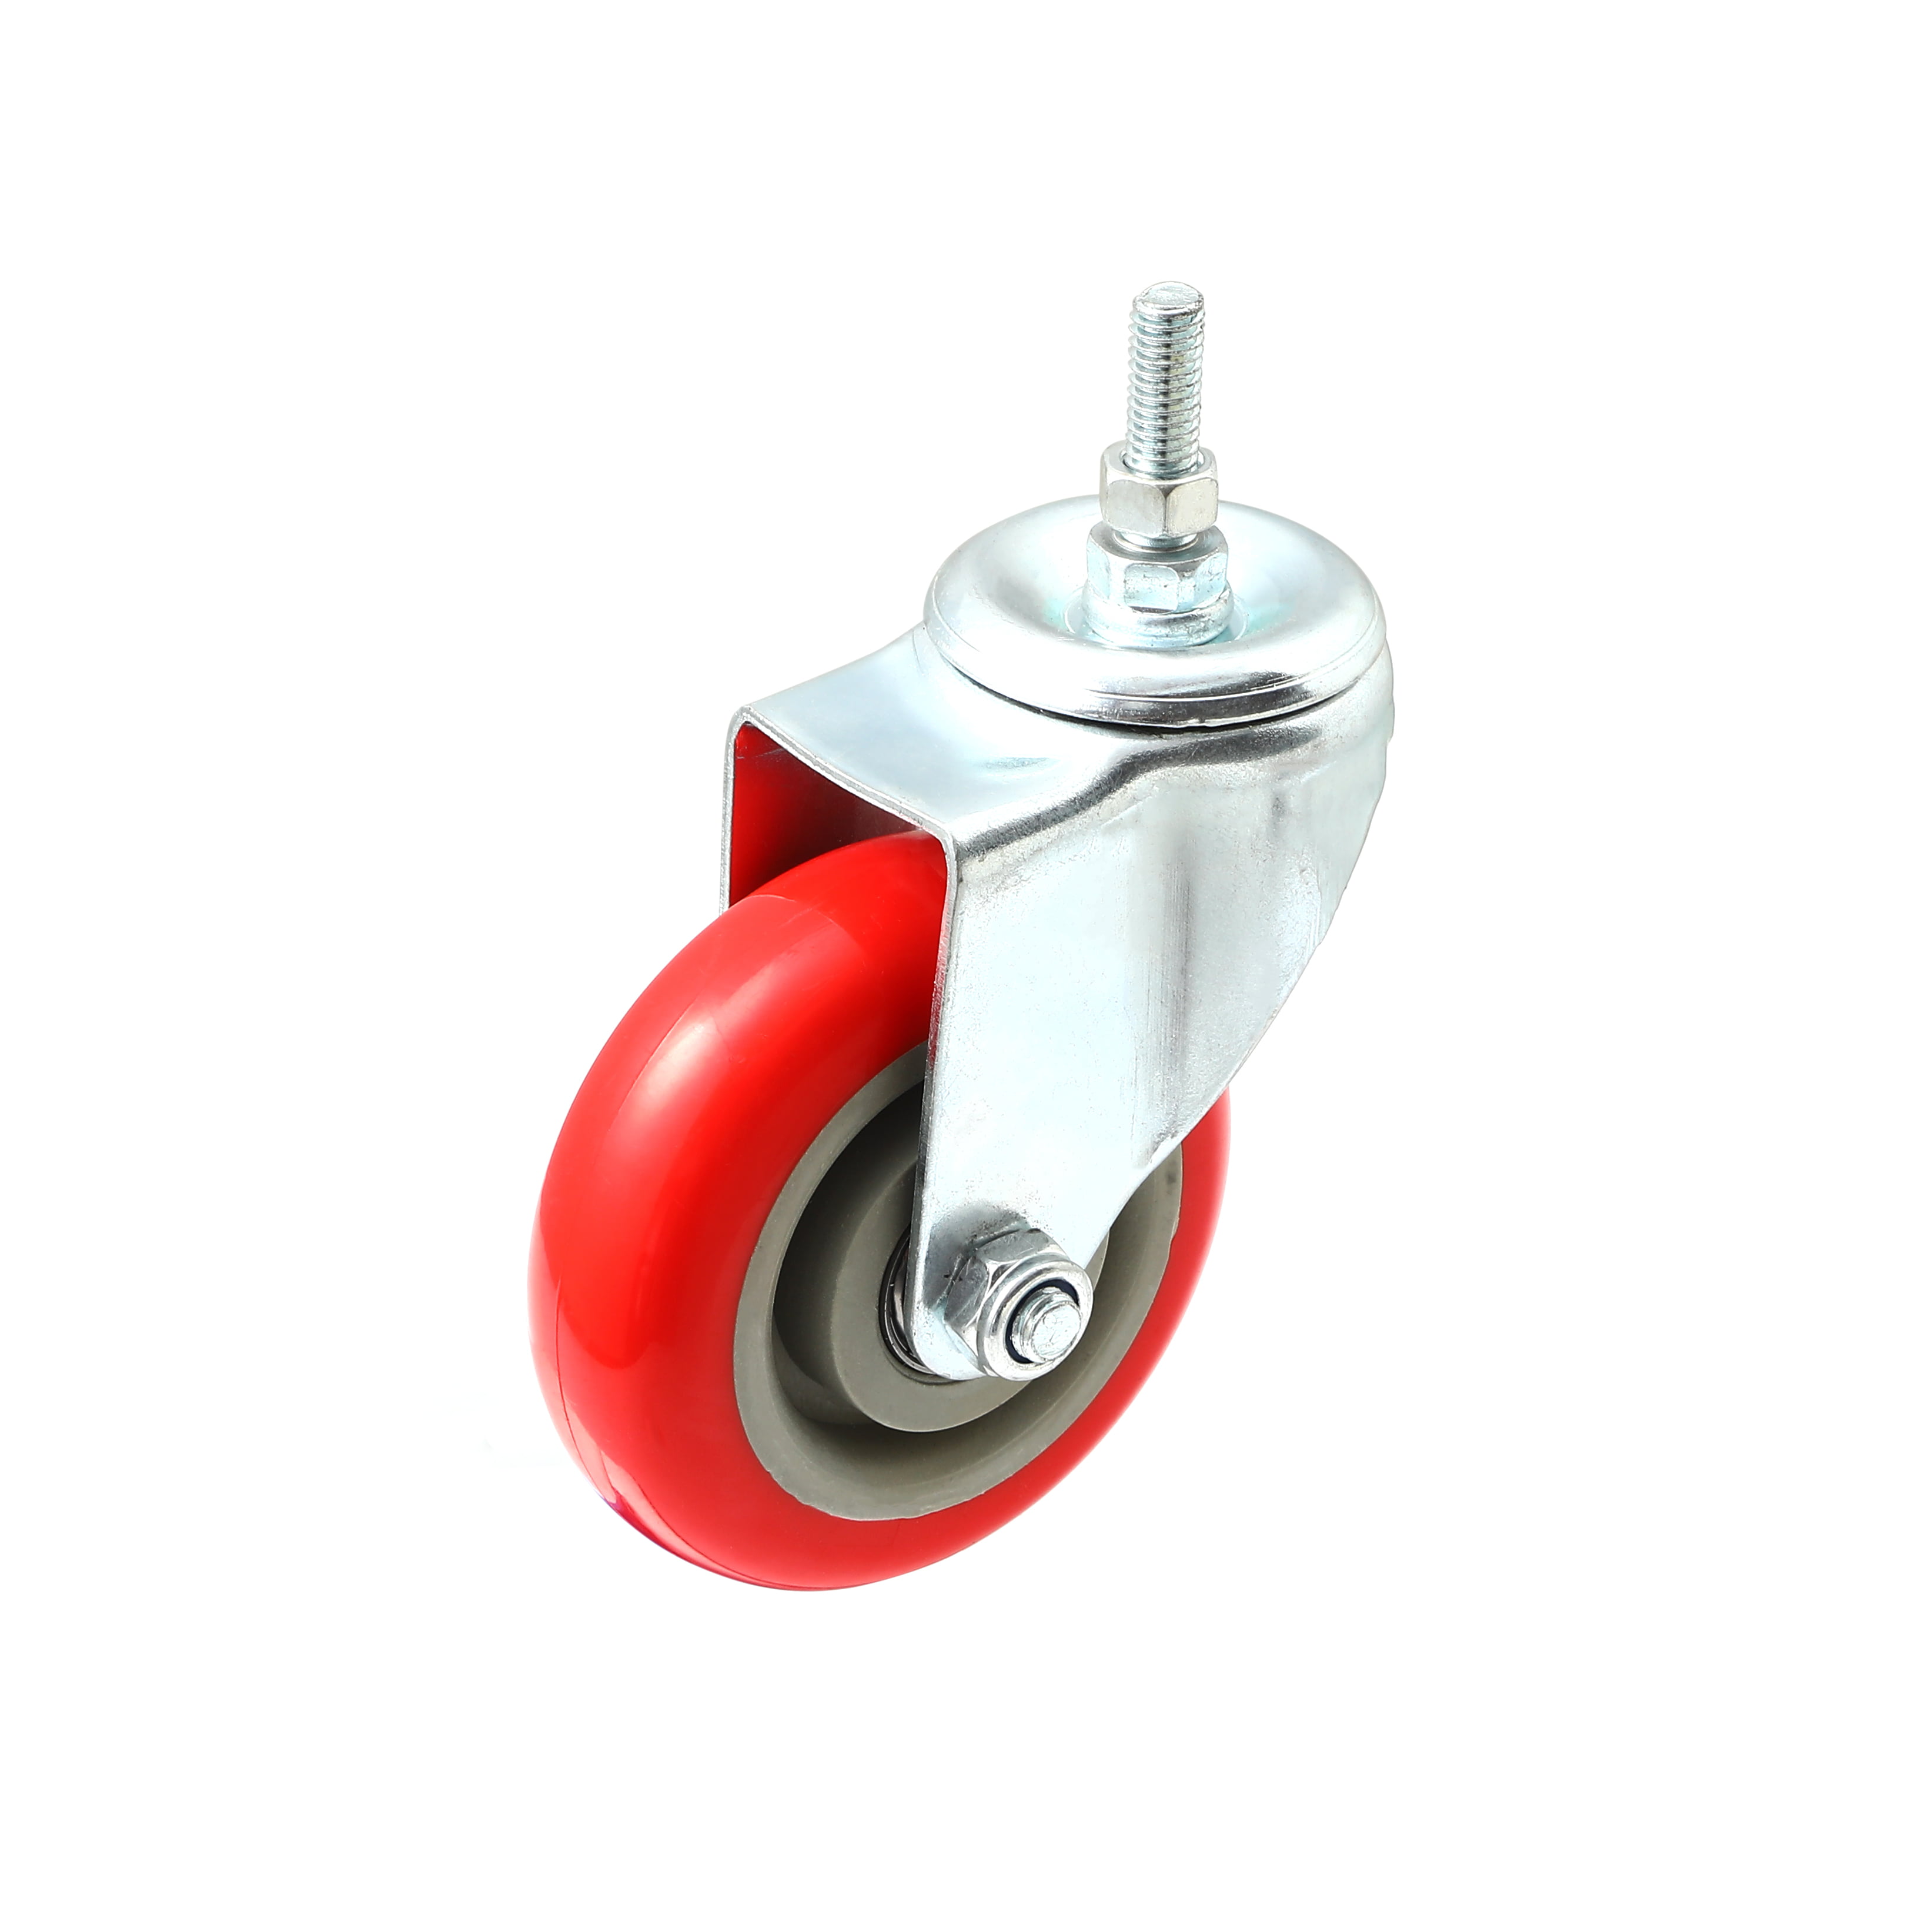 Color : Brake, Size : 75mm/3inch Hhhong Red Moving Caster Wheels,Heavy Duty Swivel Wheels for Furniture,Trolley Wheels in Polyurethane,Castor Wheels with Plate,Load Bearing 180kg,4Pcs